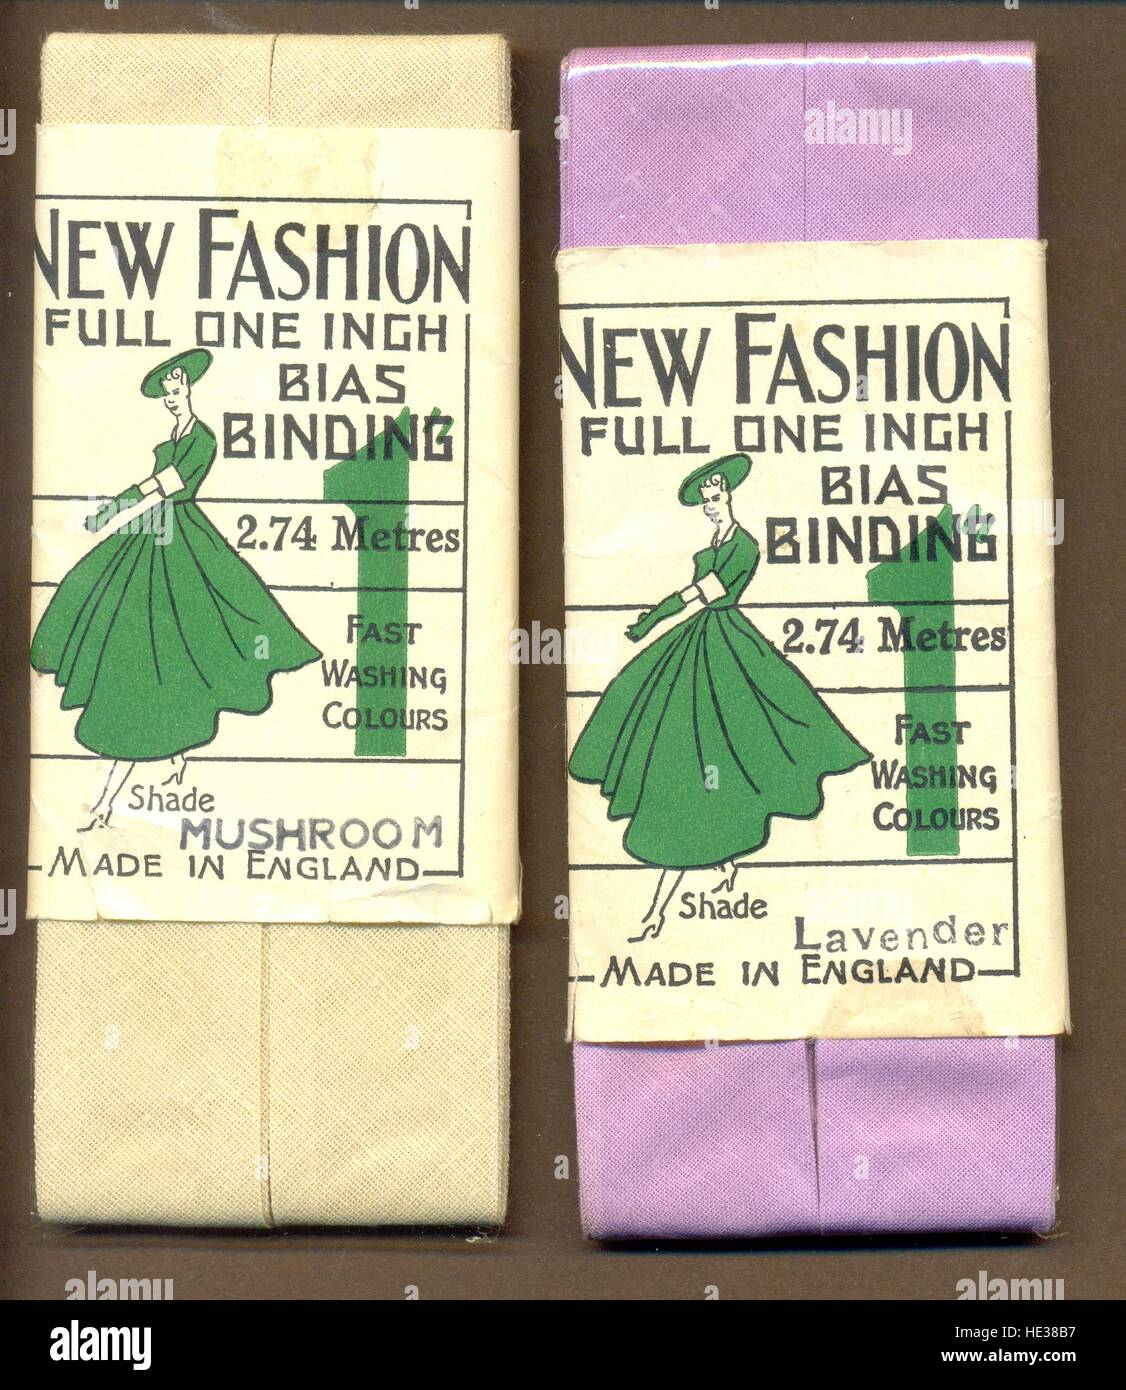 Packets of Bias Binding illustrating the full skirted silhouette of the New Look Stock Photo